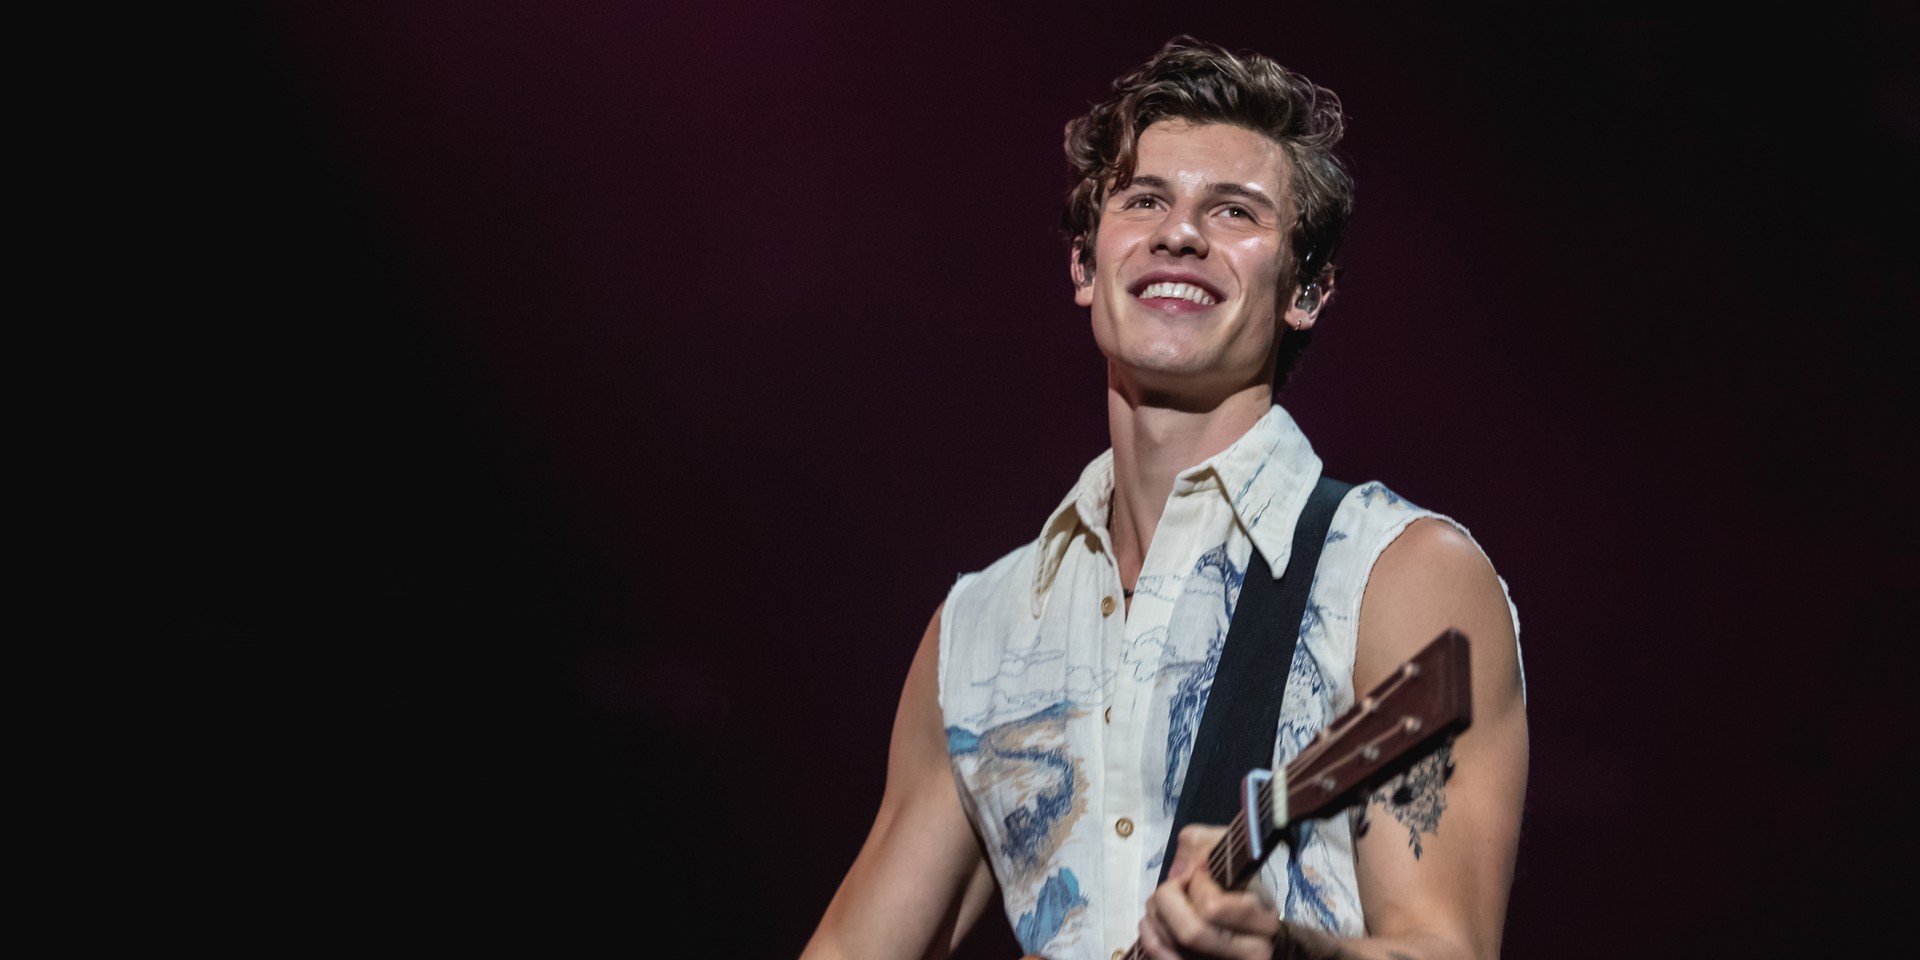 Shawn Mendes mesmerises with a show marked by intimacy - gig report 